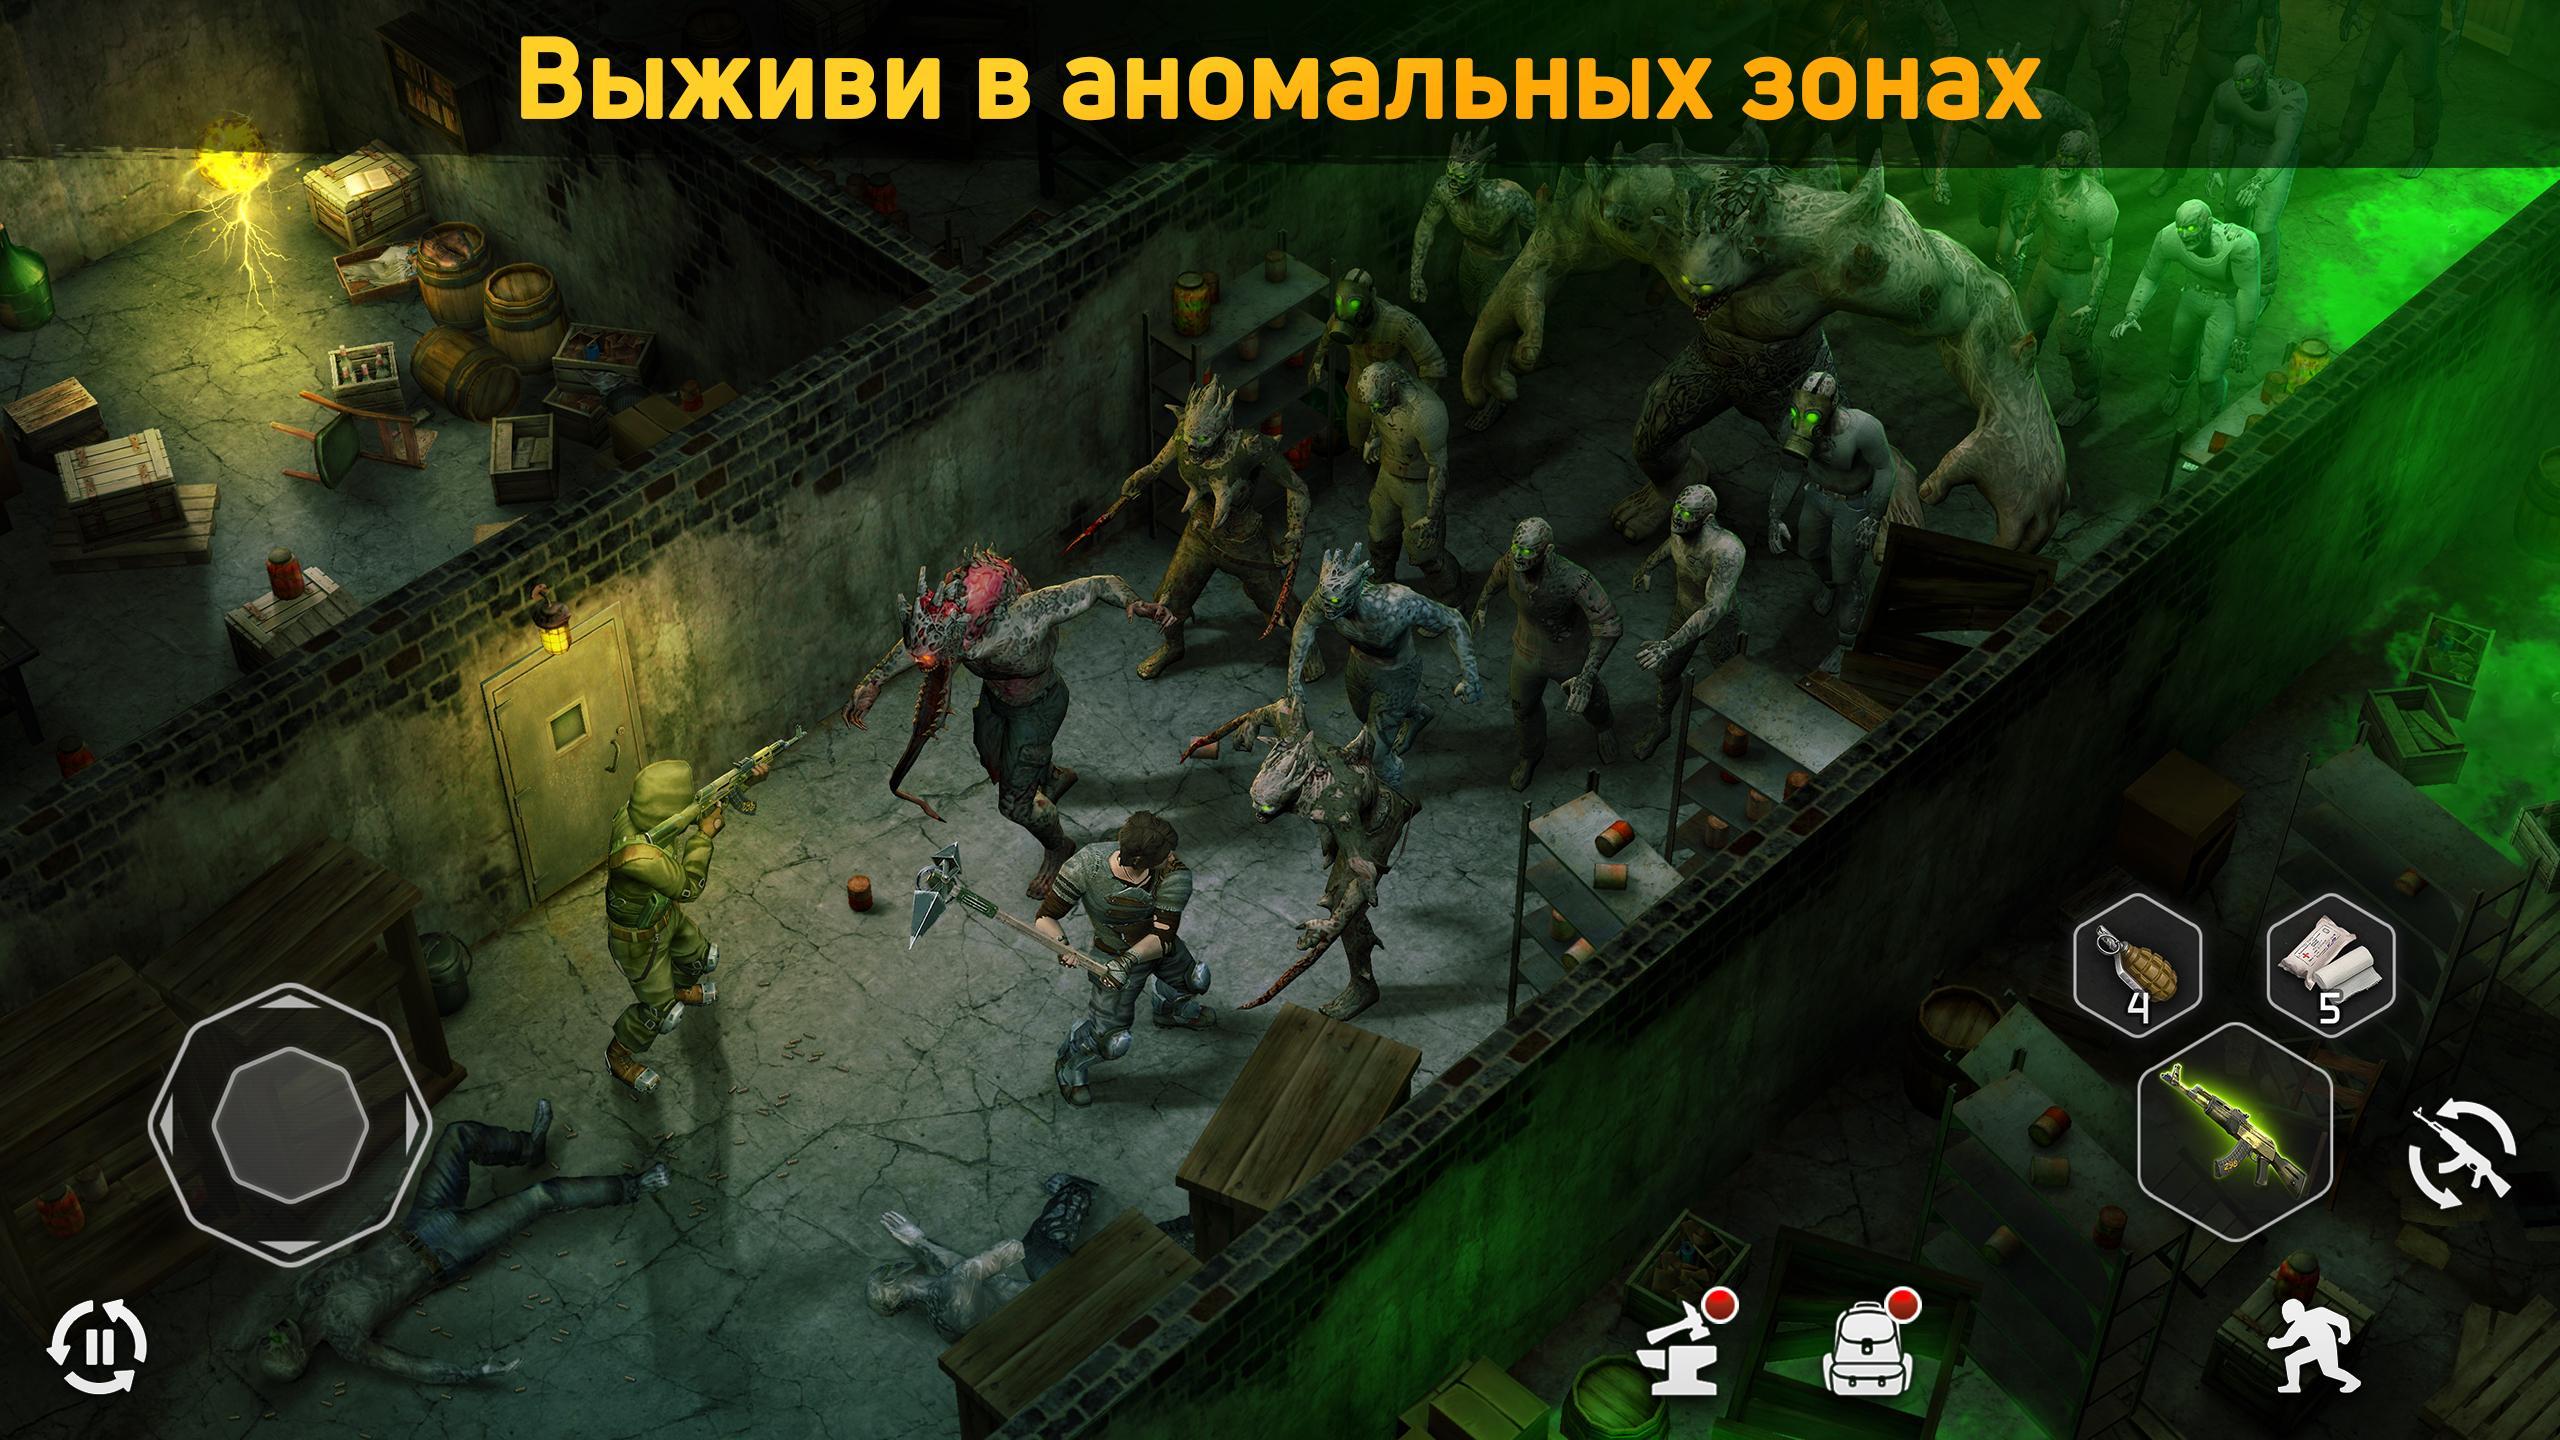 dawn of zombies